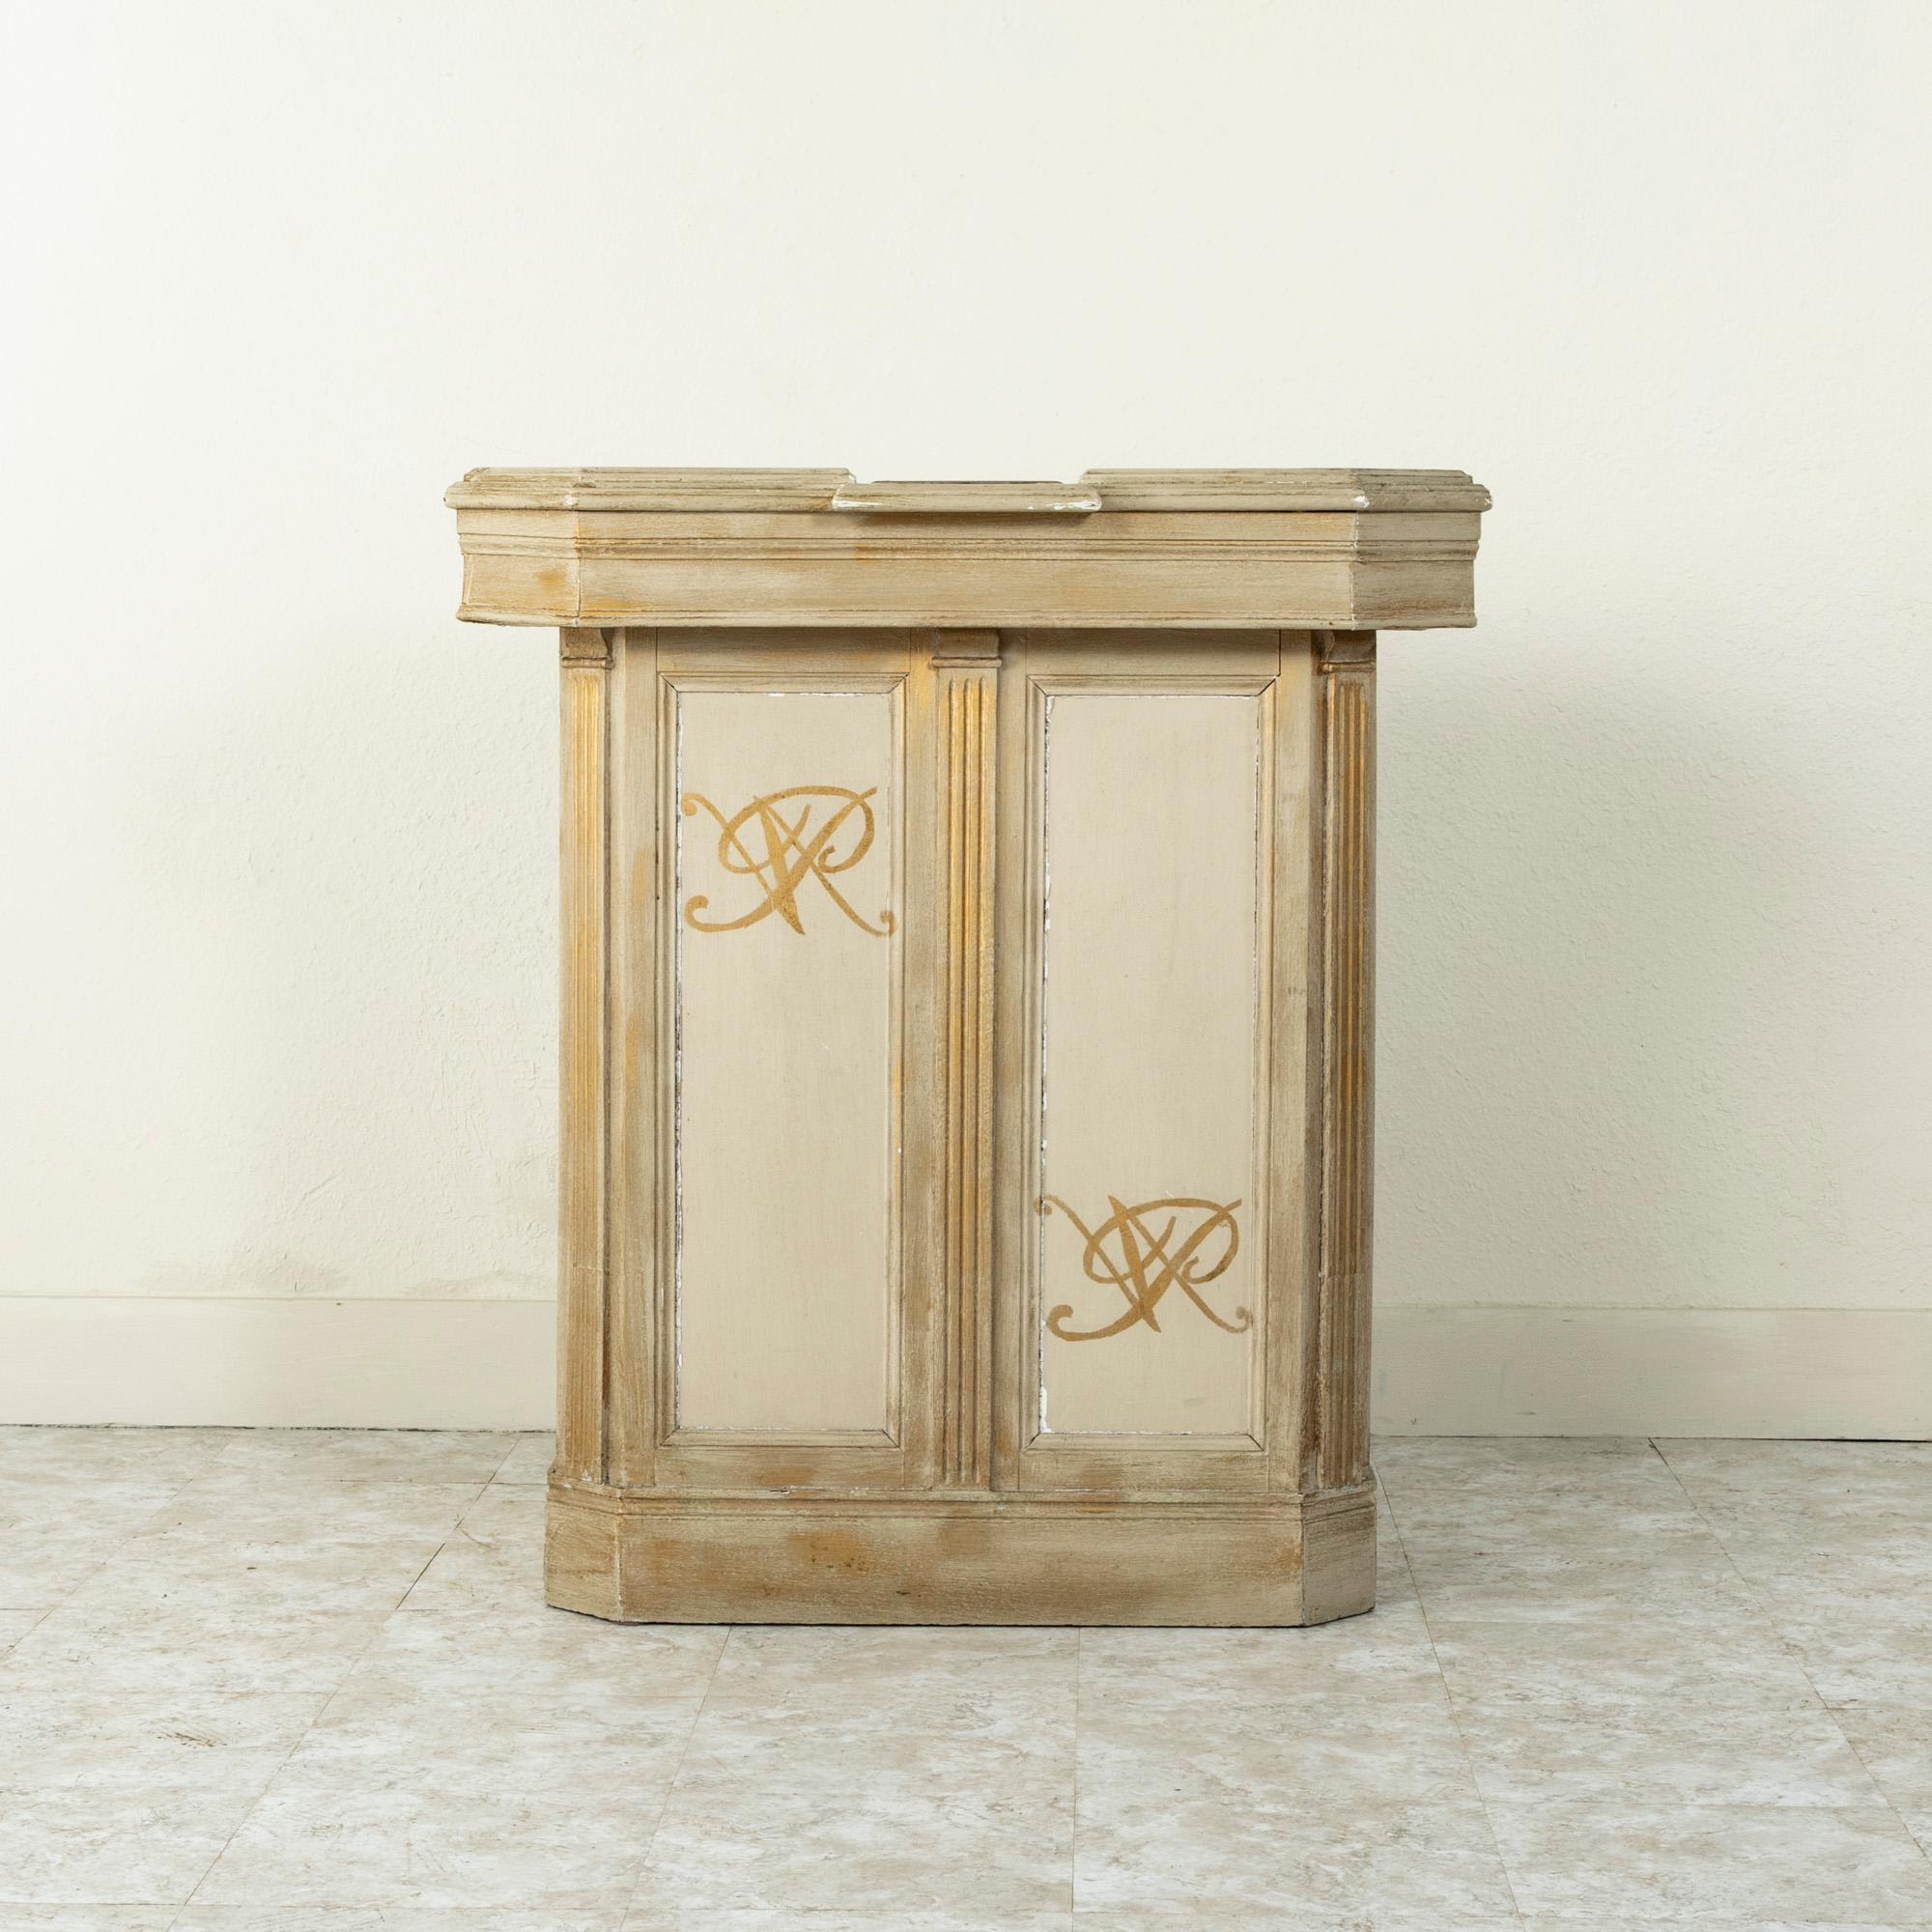 Originally in a French shop, this cream colored painted counter or bar features paneled sides and a beveled top. Gold detailing including an interlaced monogram VR on the front of the counter. A metal plate on the top toward the front of the counter